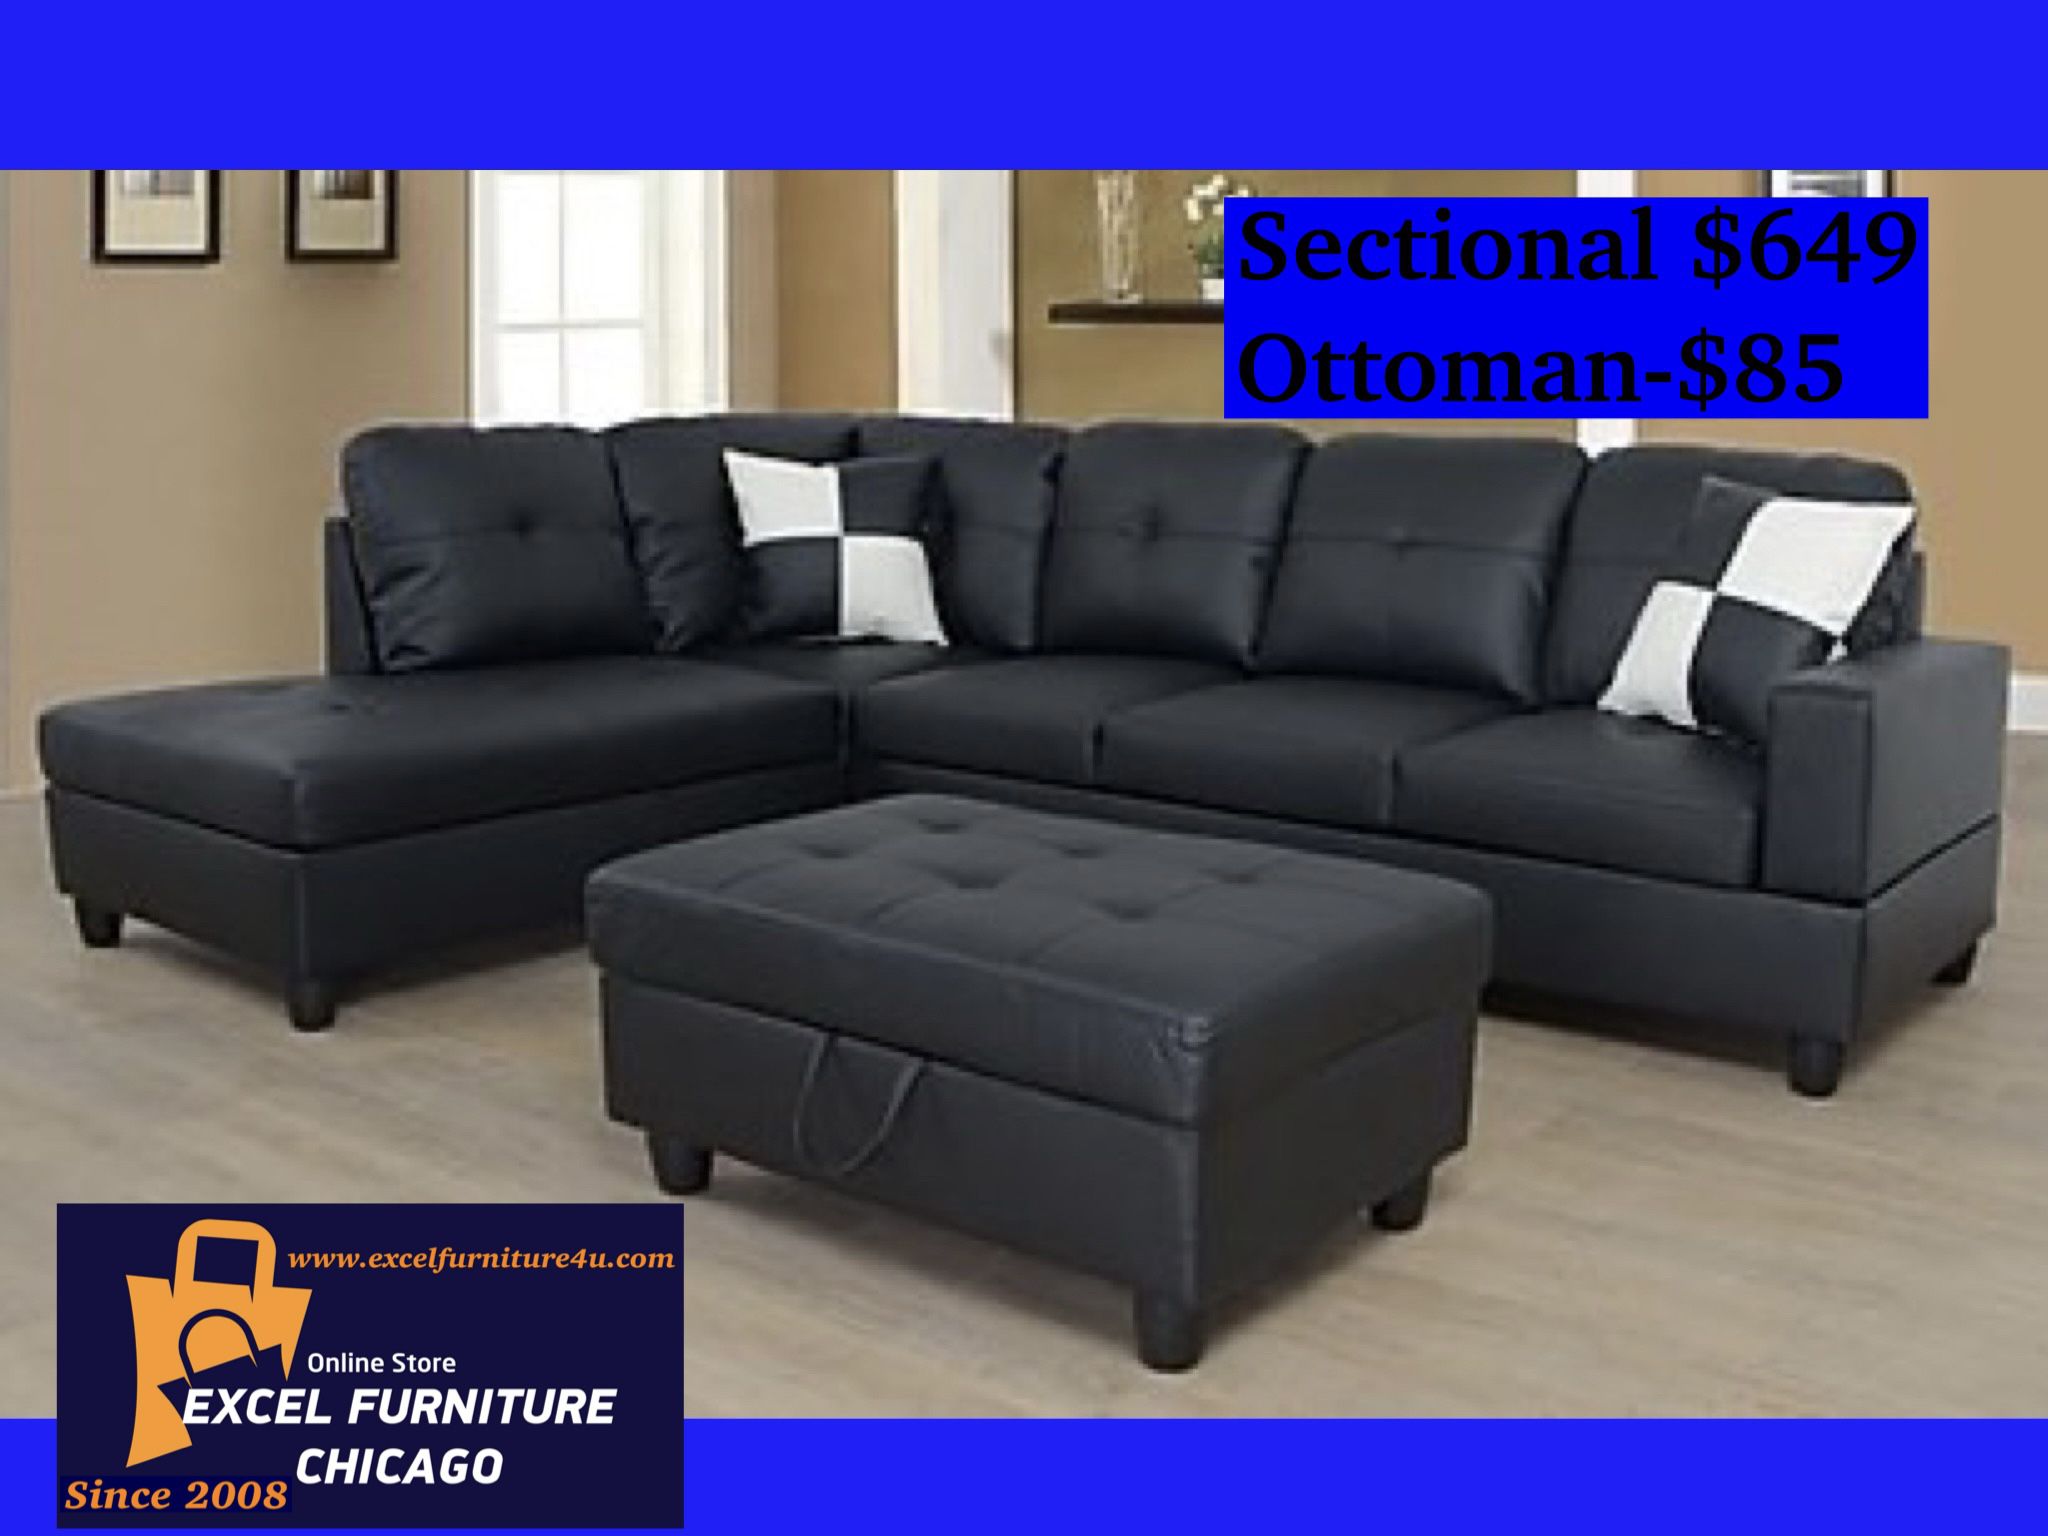 Brand New Black Sectional Sofa Couch 